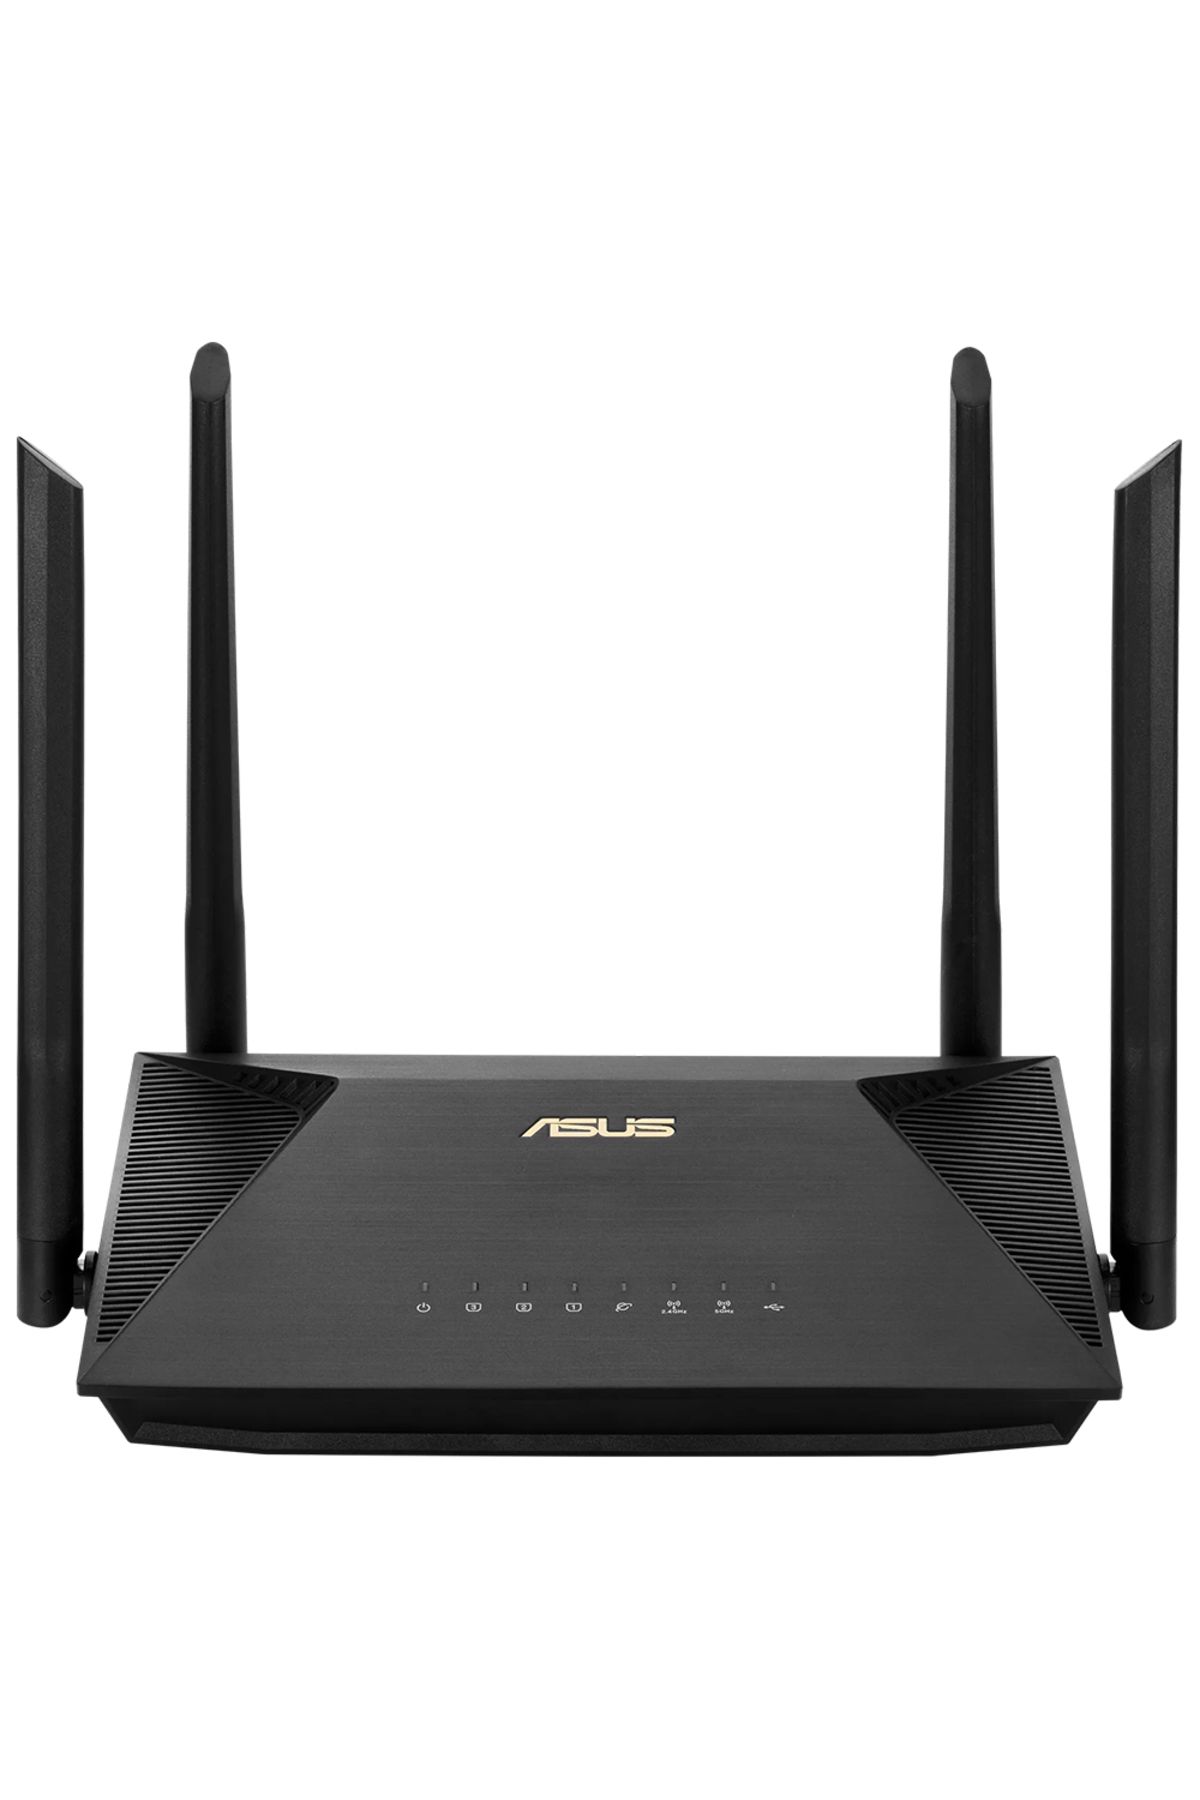 ASUS Rt-ax1800u Dual Band Aiprotection Wifi 6 Router